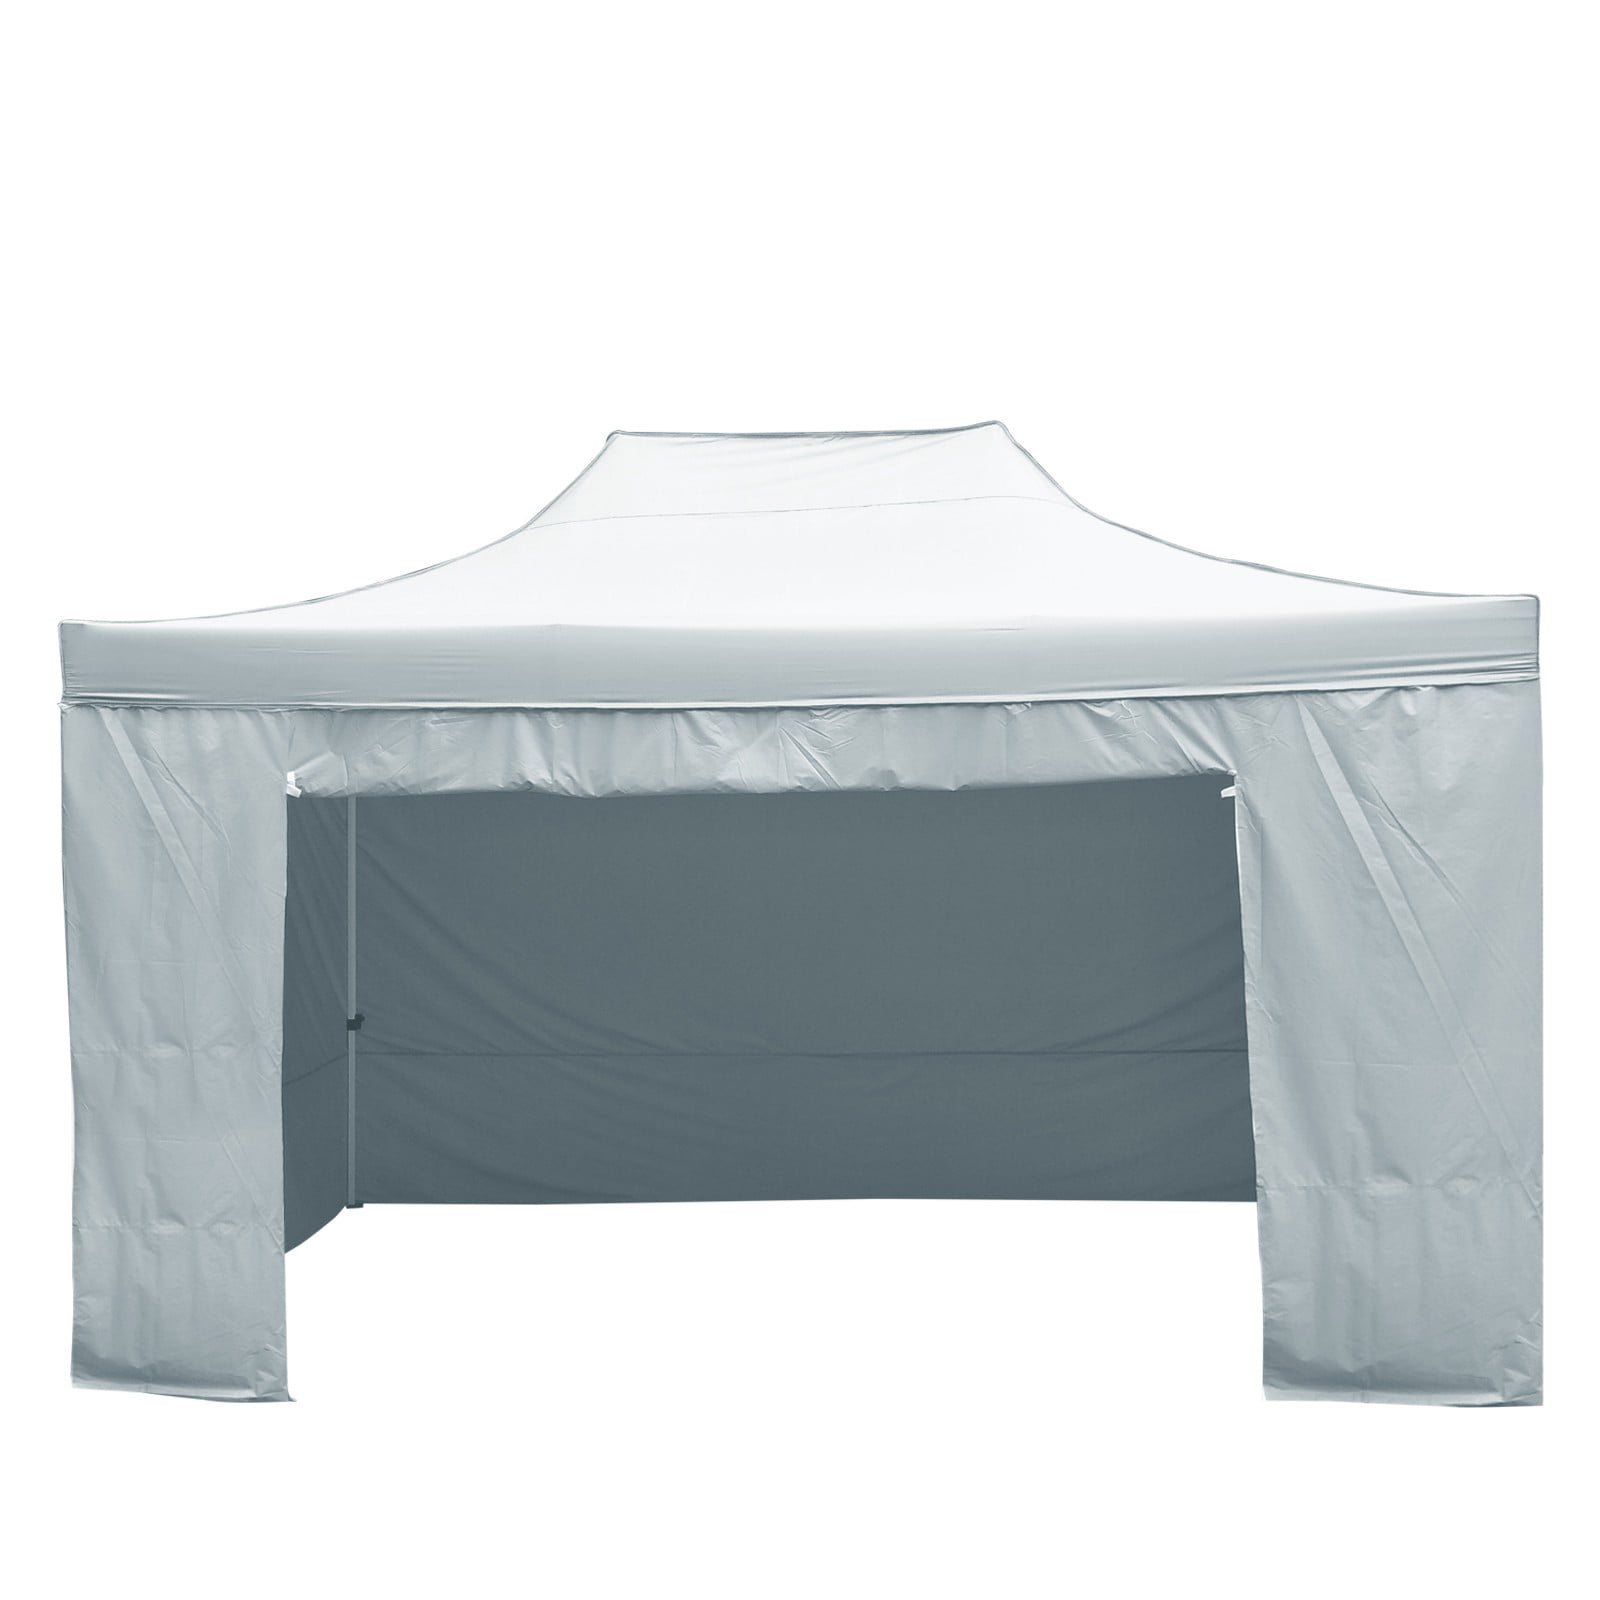 Market Stall 10x6 Brand new table stall catering frame full package cover/boards